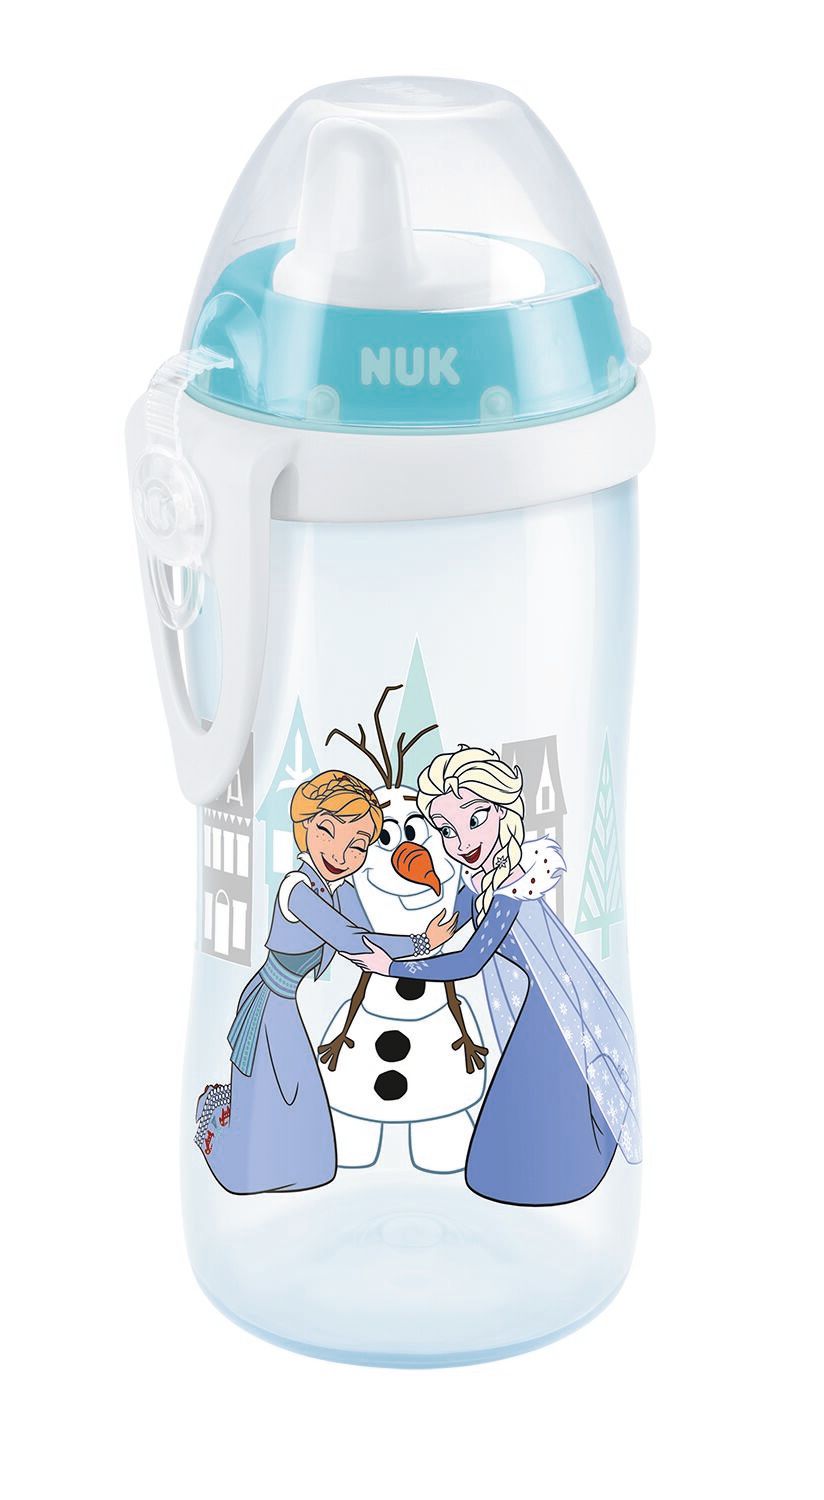 NUK has released a Frozen range for little fans (and hands) just in time for Frozen 2